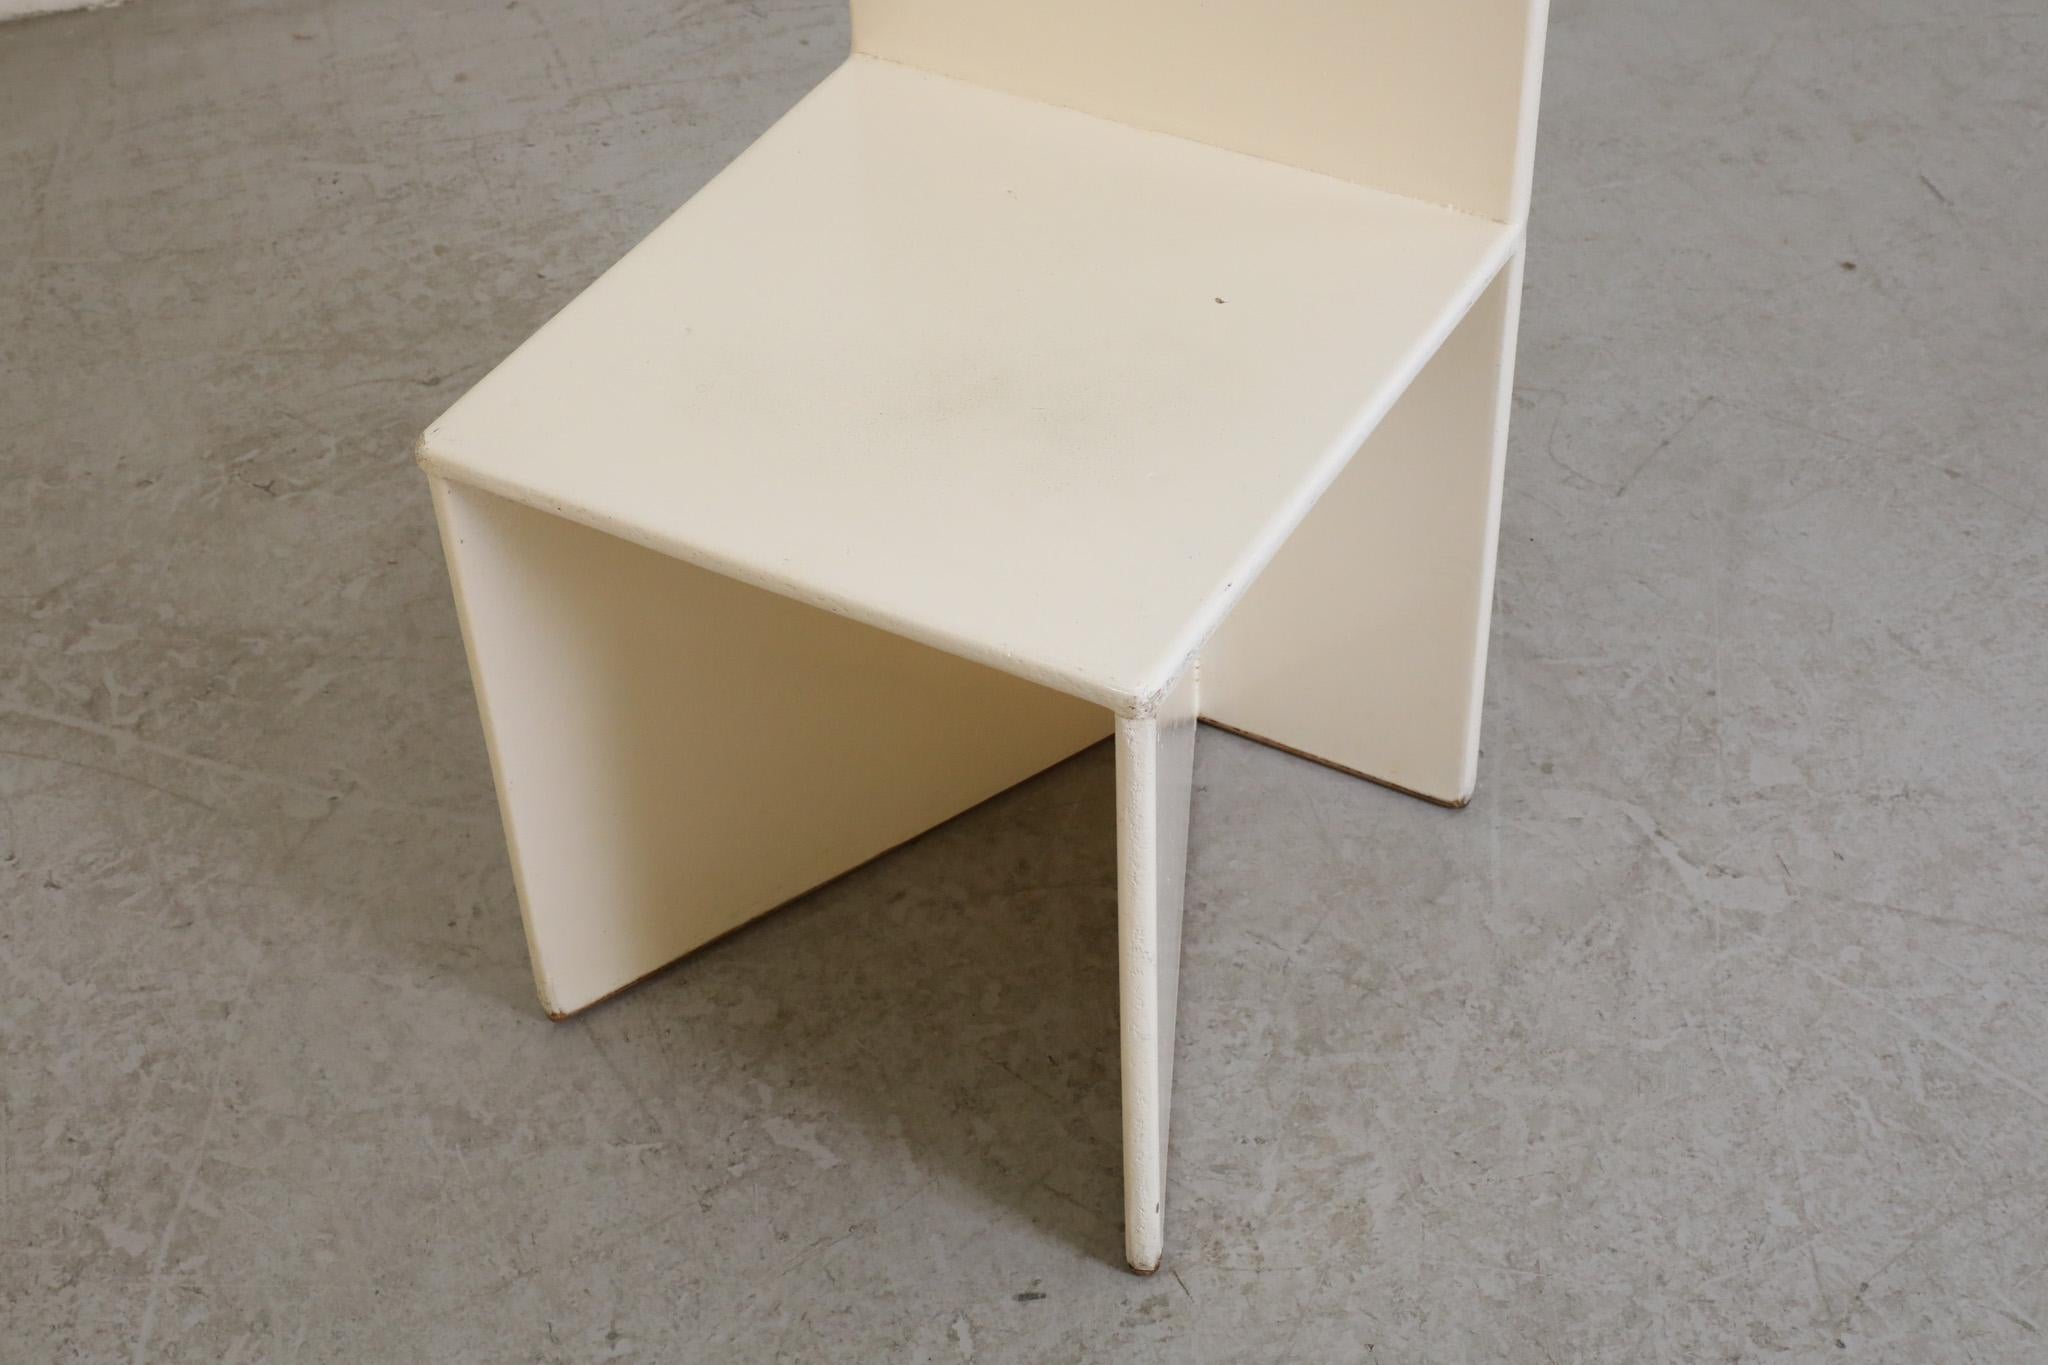 Pre War Gerrit Rietveld Style Modernist Painted Chair For Sale 9